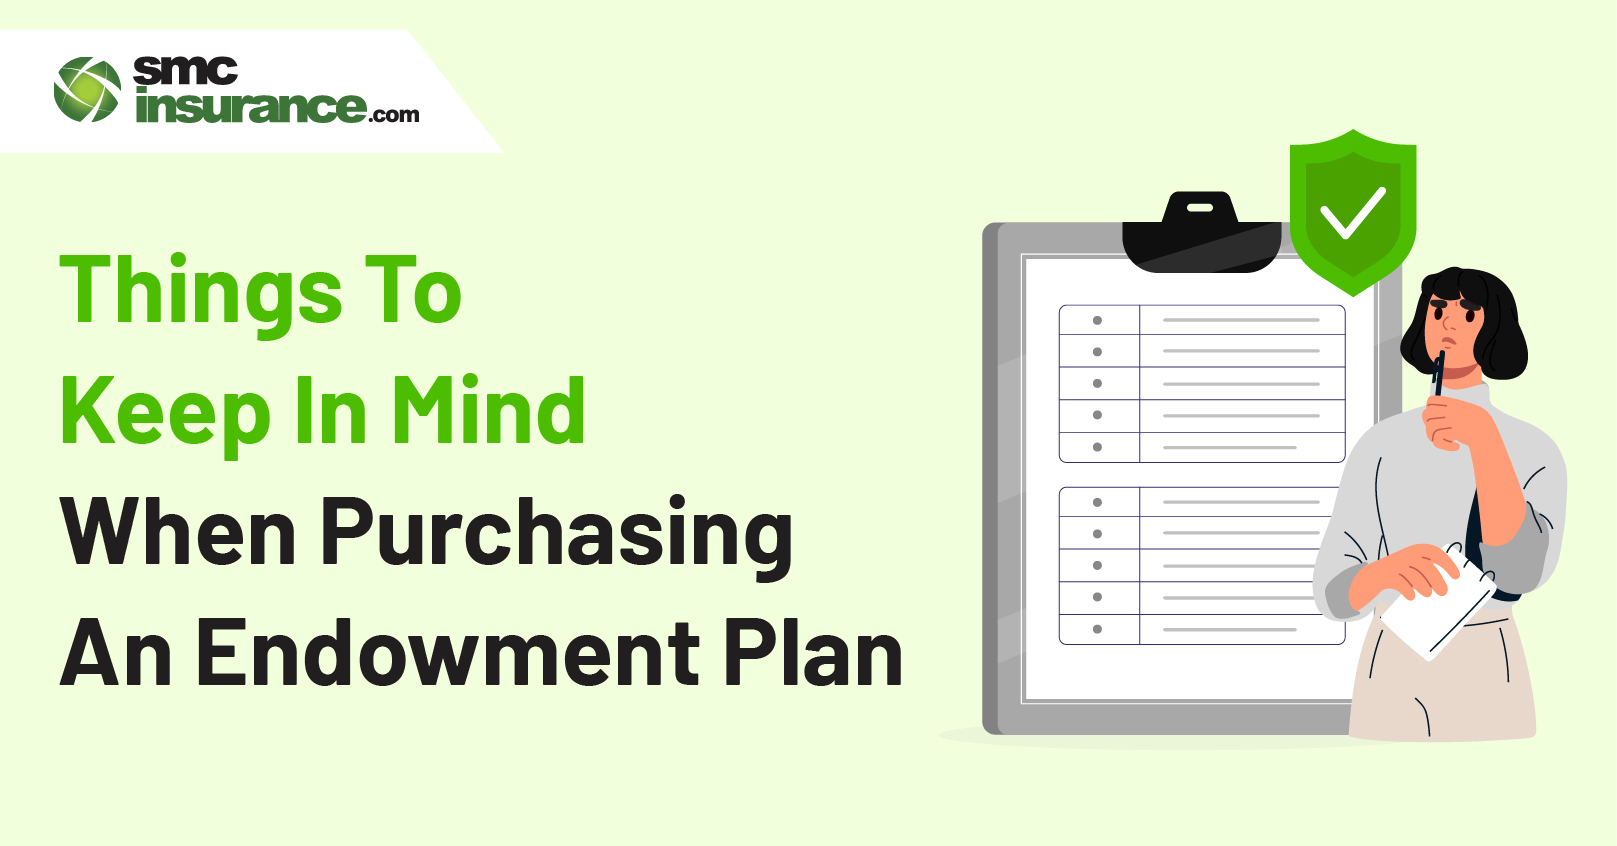 Things To Keep In Mind When Purchasing An Endowment Plan